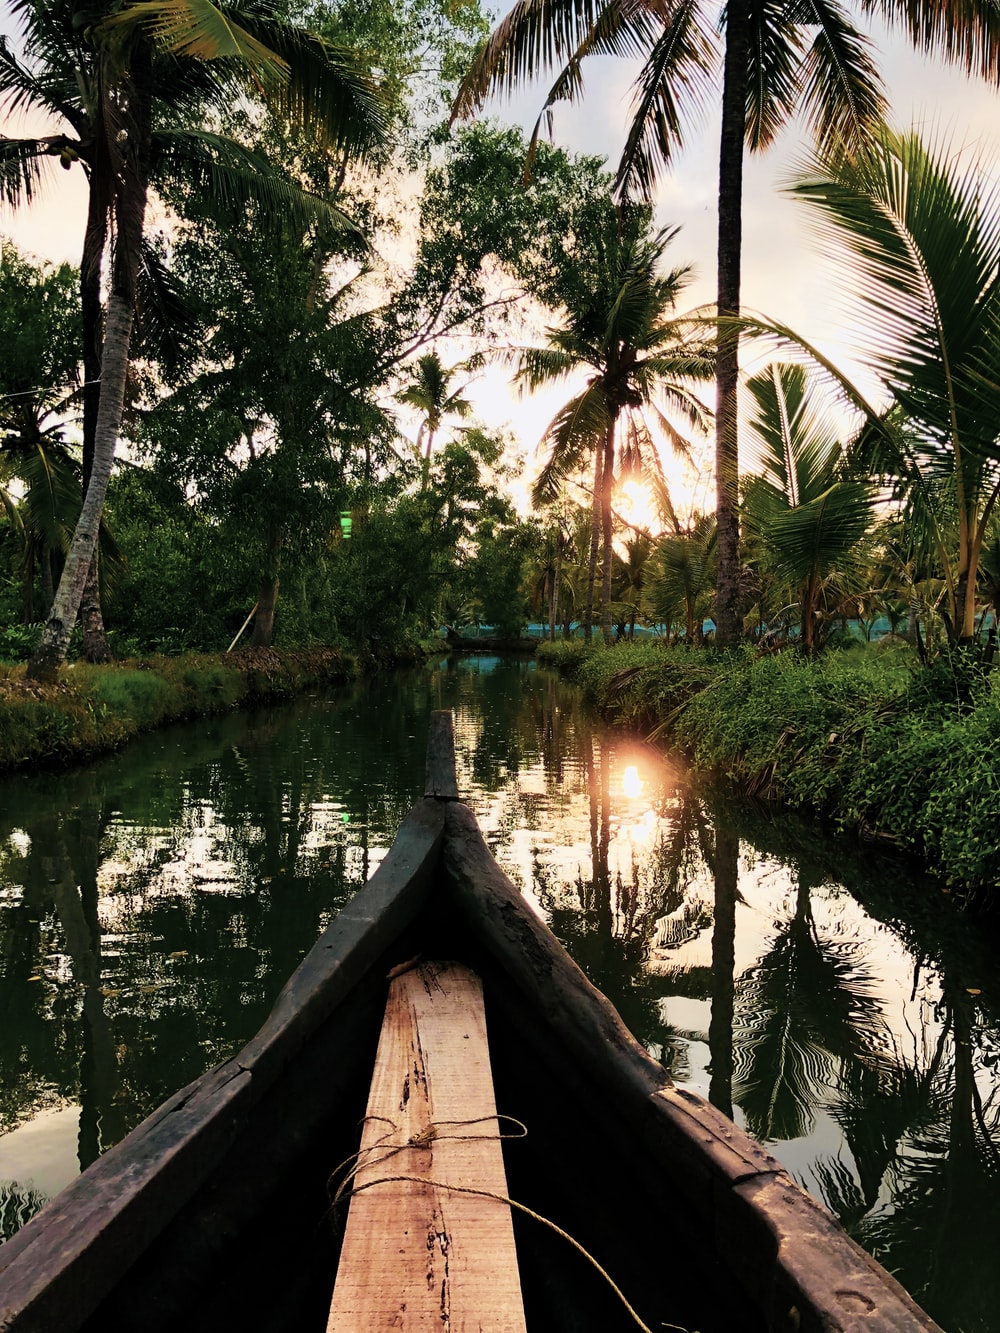 Kerala Picture [Scenic Travel Photo]. Download Free Image